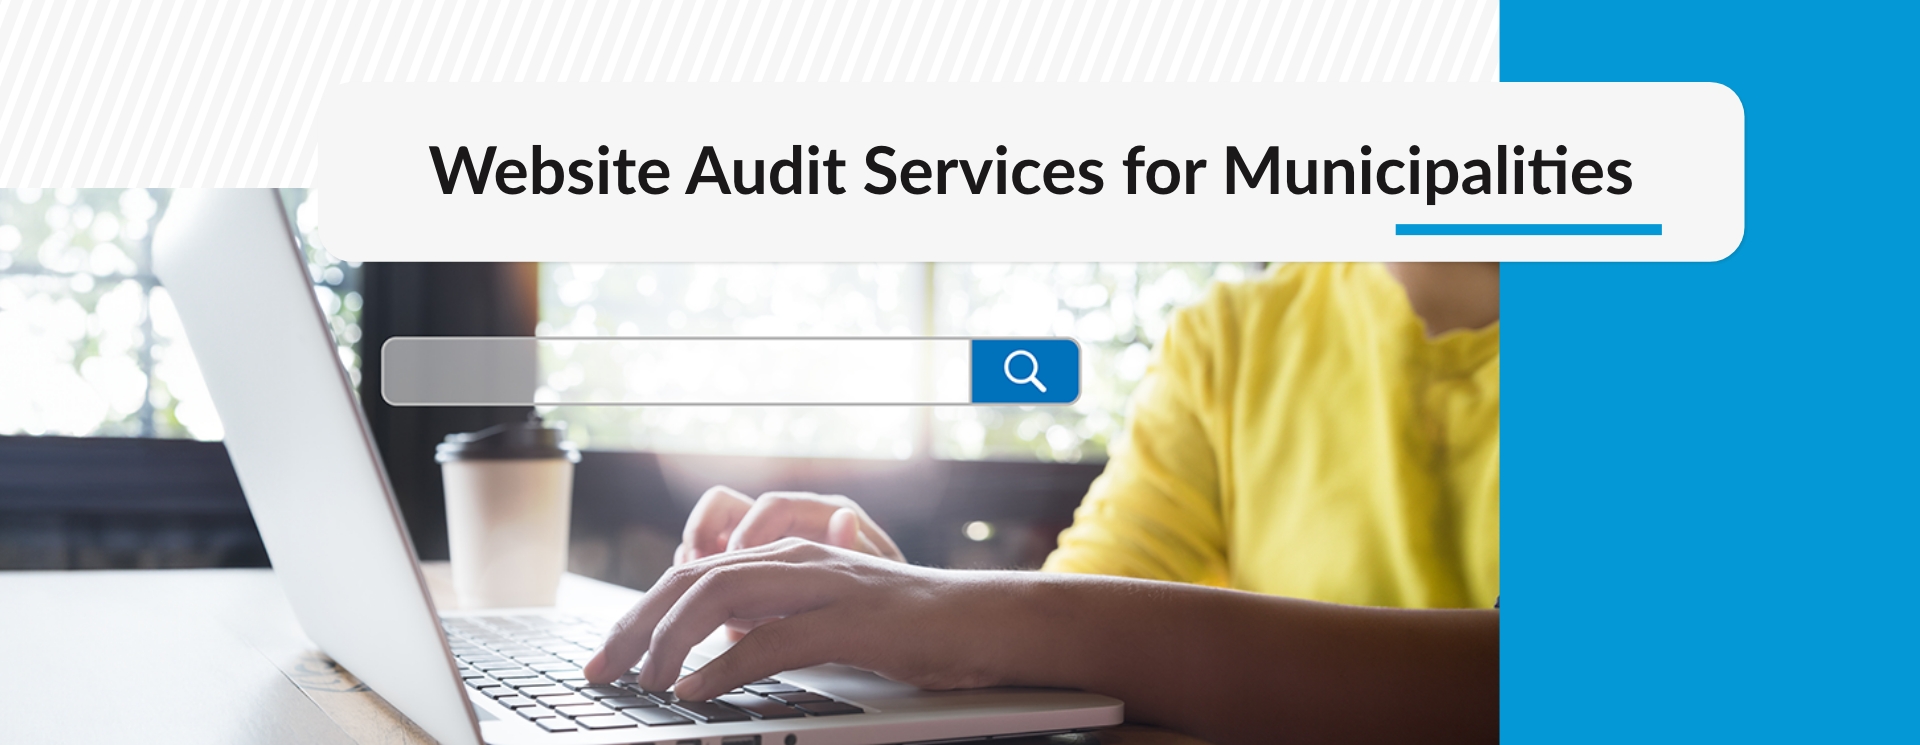 Banner for article "Website Audit Services for Municipalities"